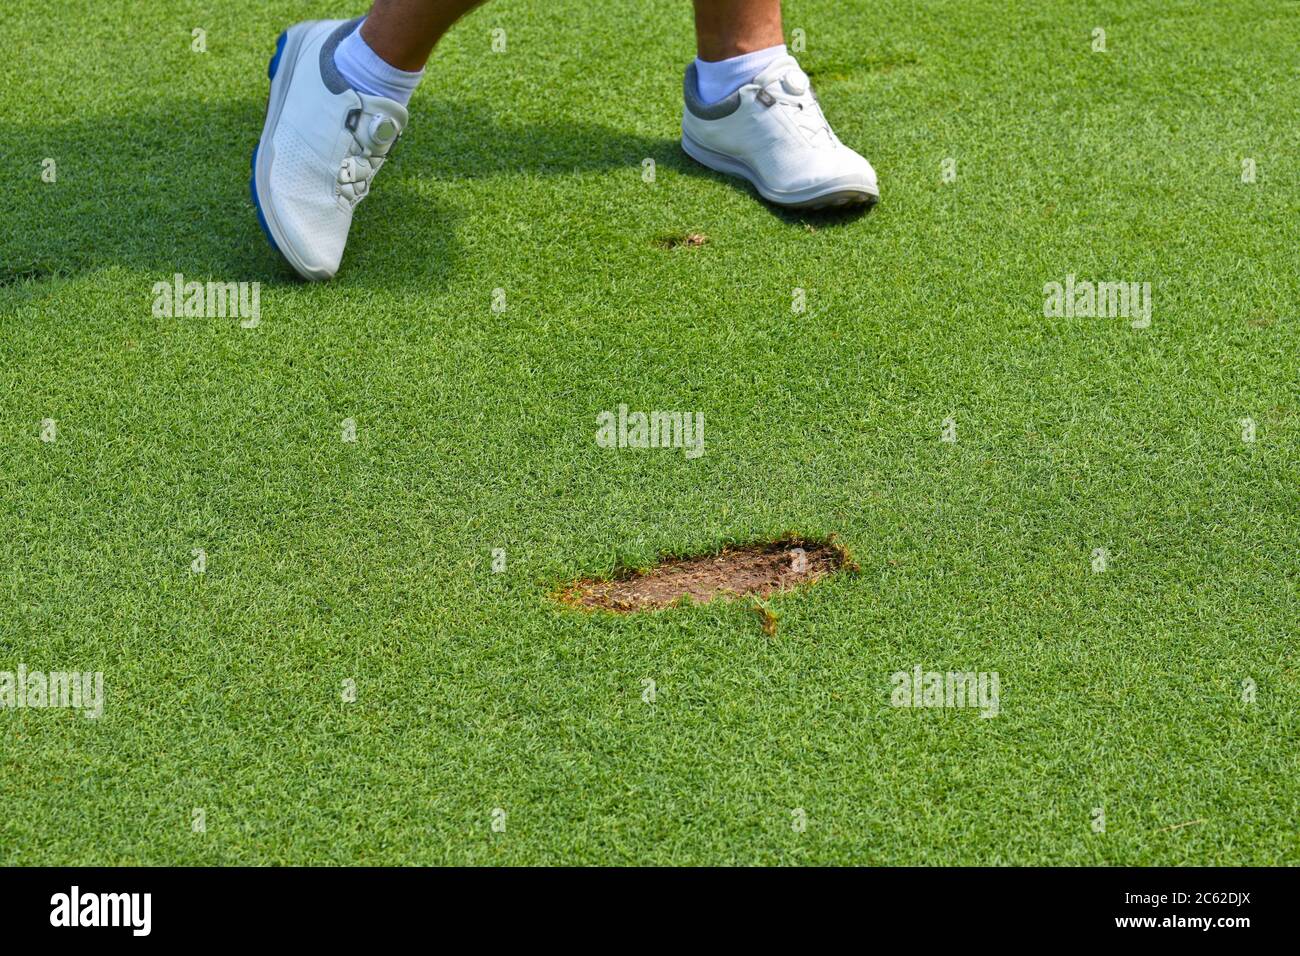 Young Man leaving a Divot cut out of the ground in the course of playing a stroke. Stock Photo